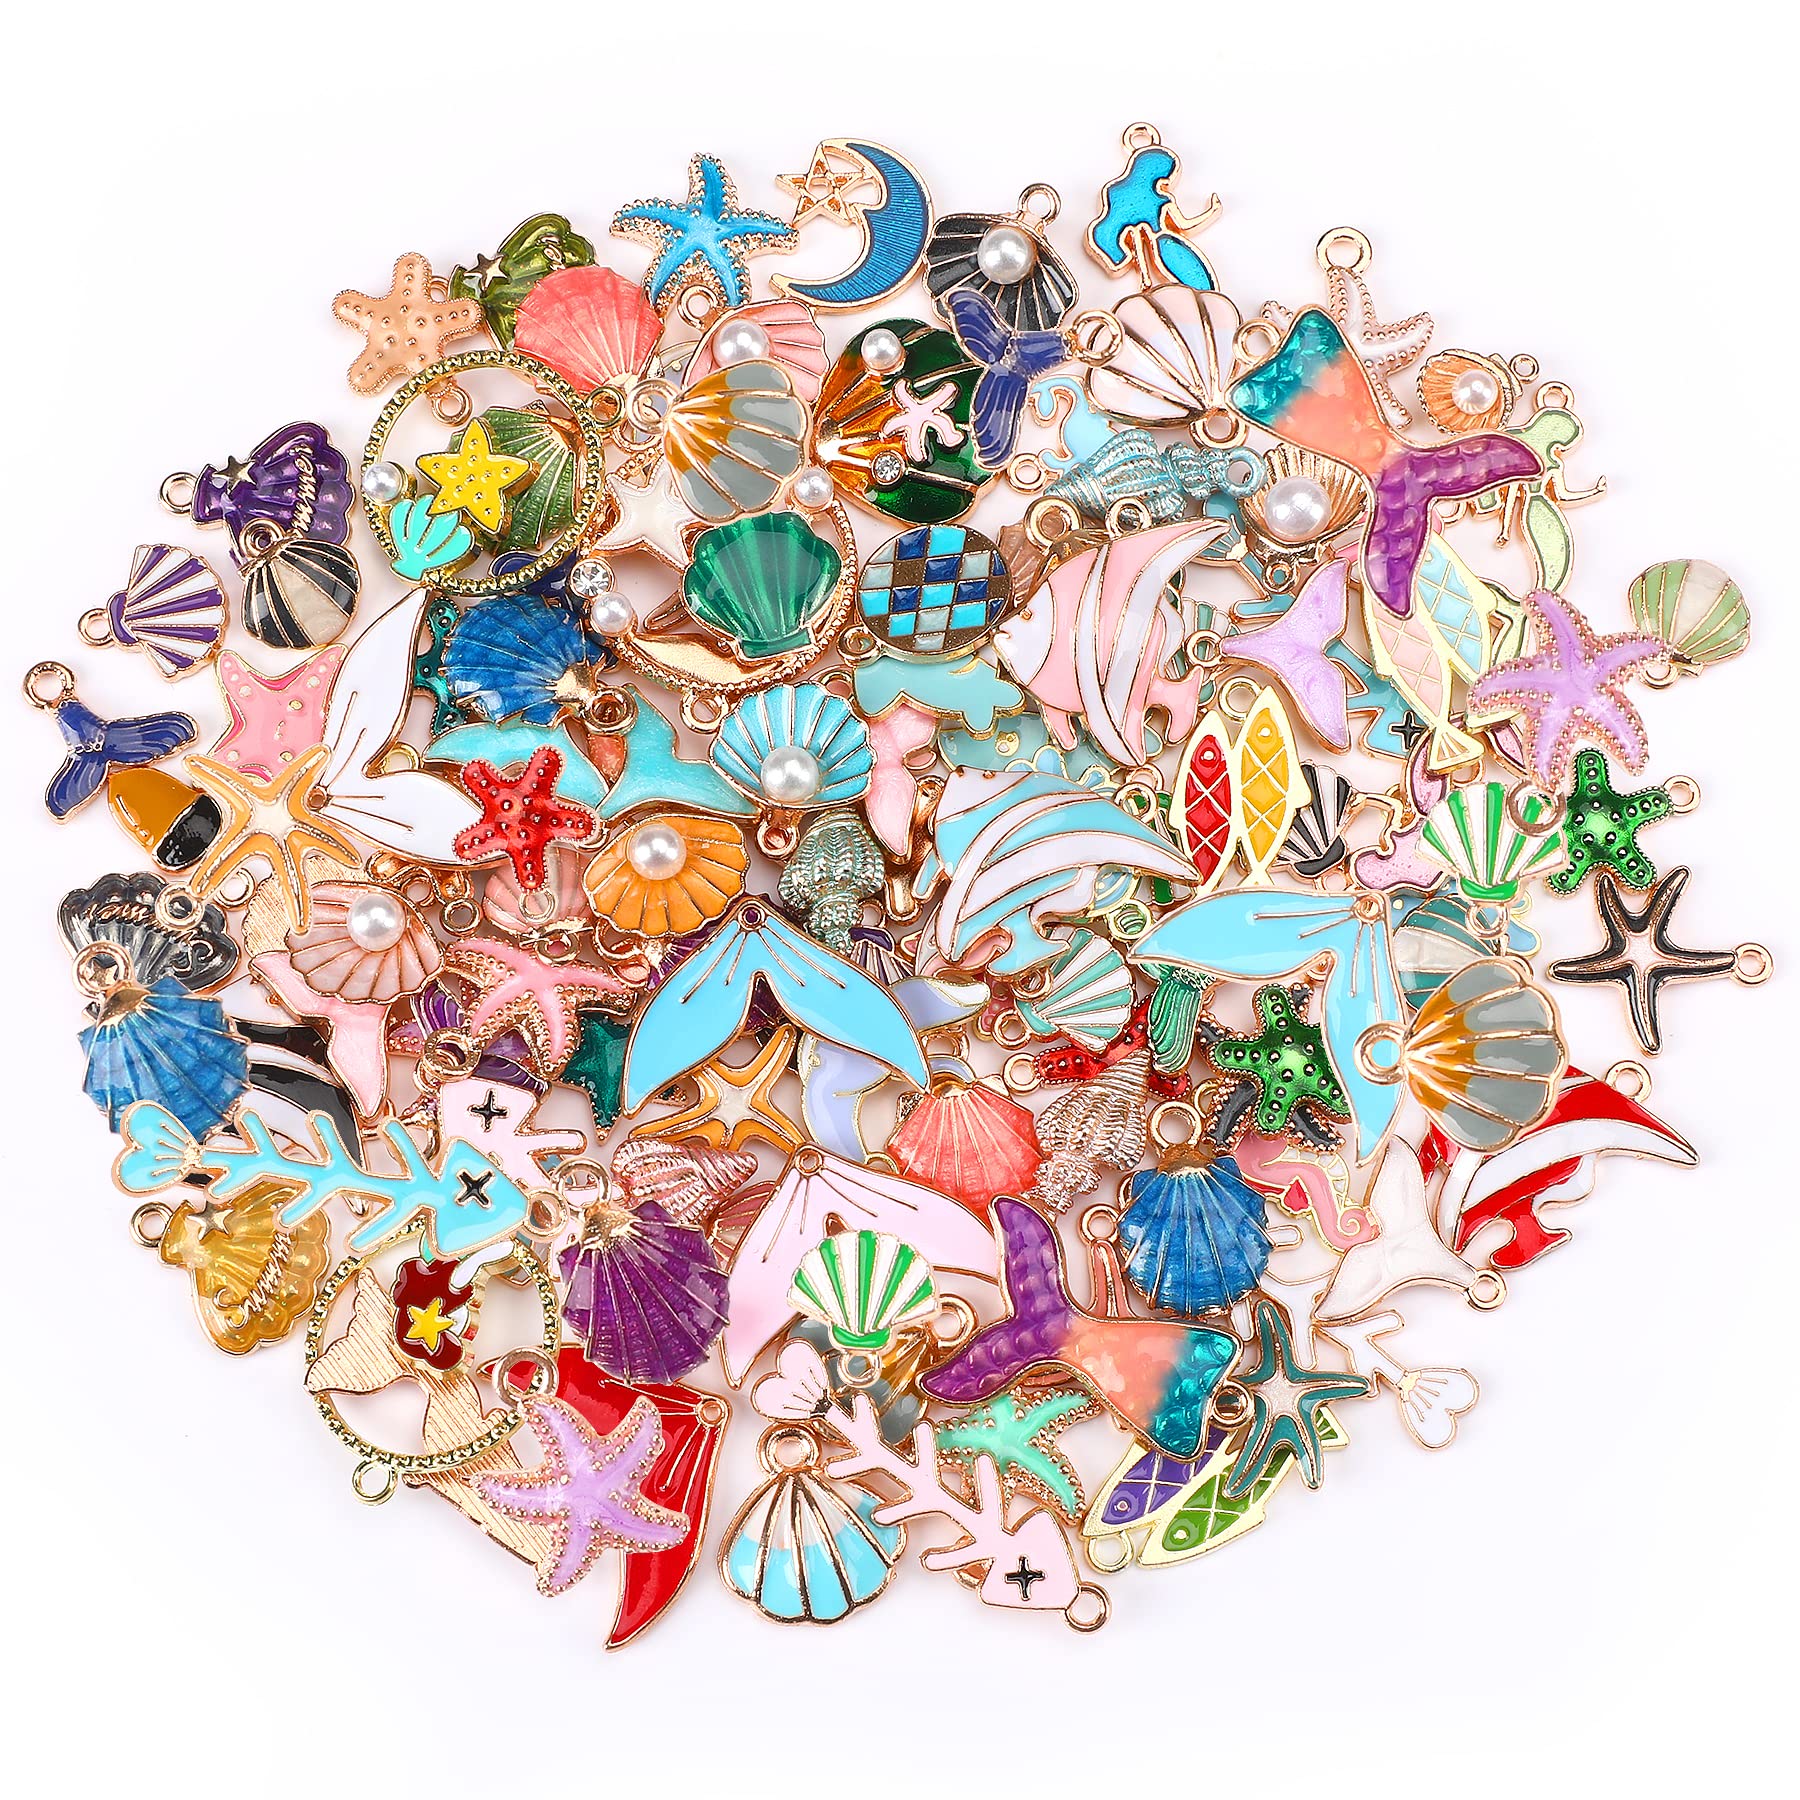 MARFOREVER 120 Pcs Summer Ocean Themed Sea Charms for Jewelry Making, Assorted Gold Enamel Starfish Seashell Marine Pendants for